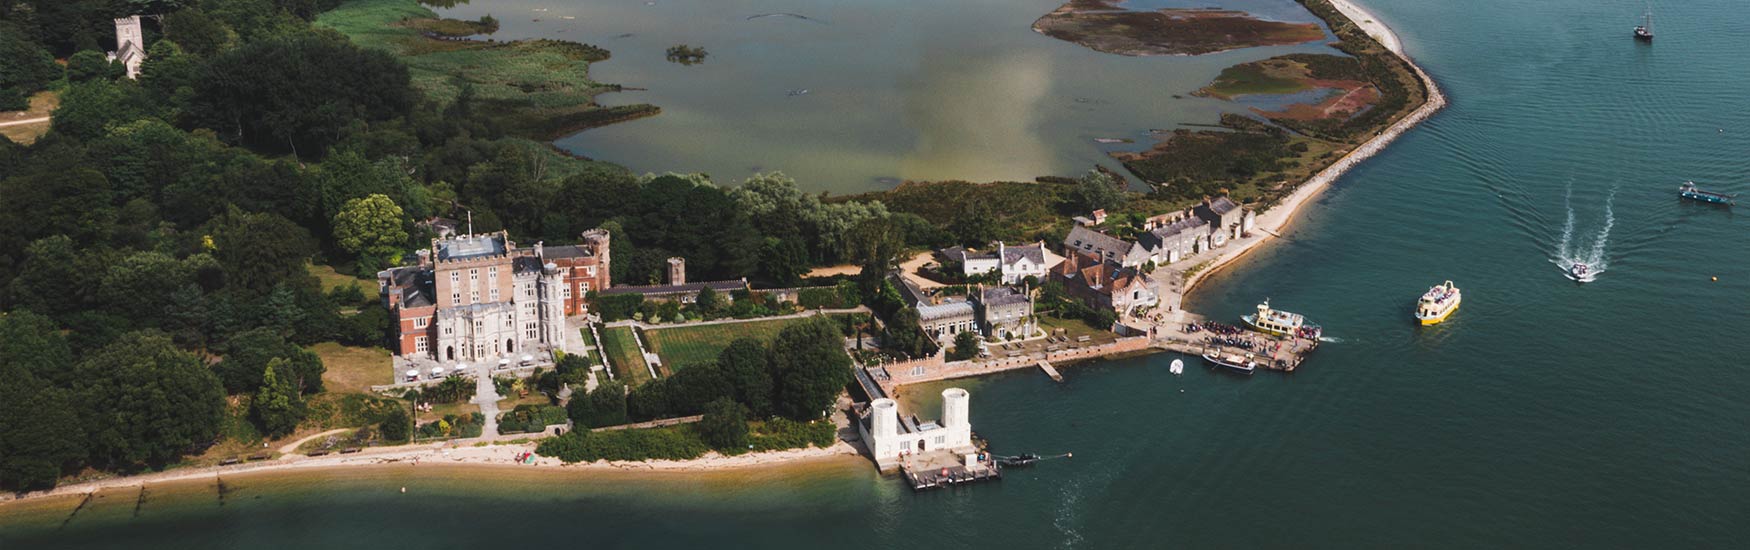 Aerial view of Brownsea island house and boats coming into land 